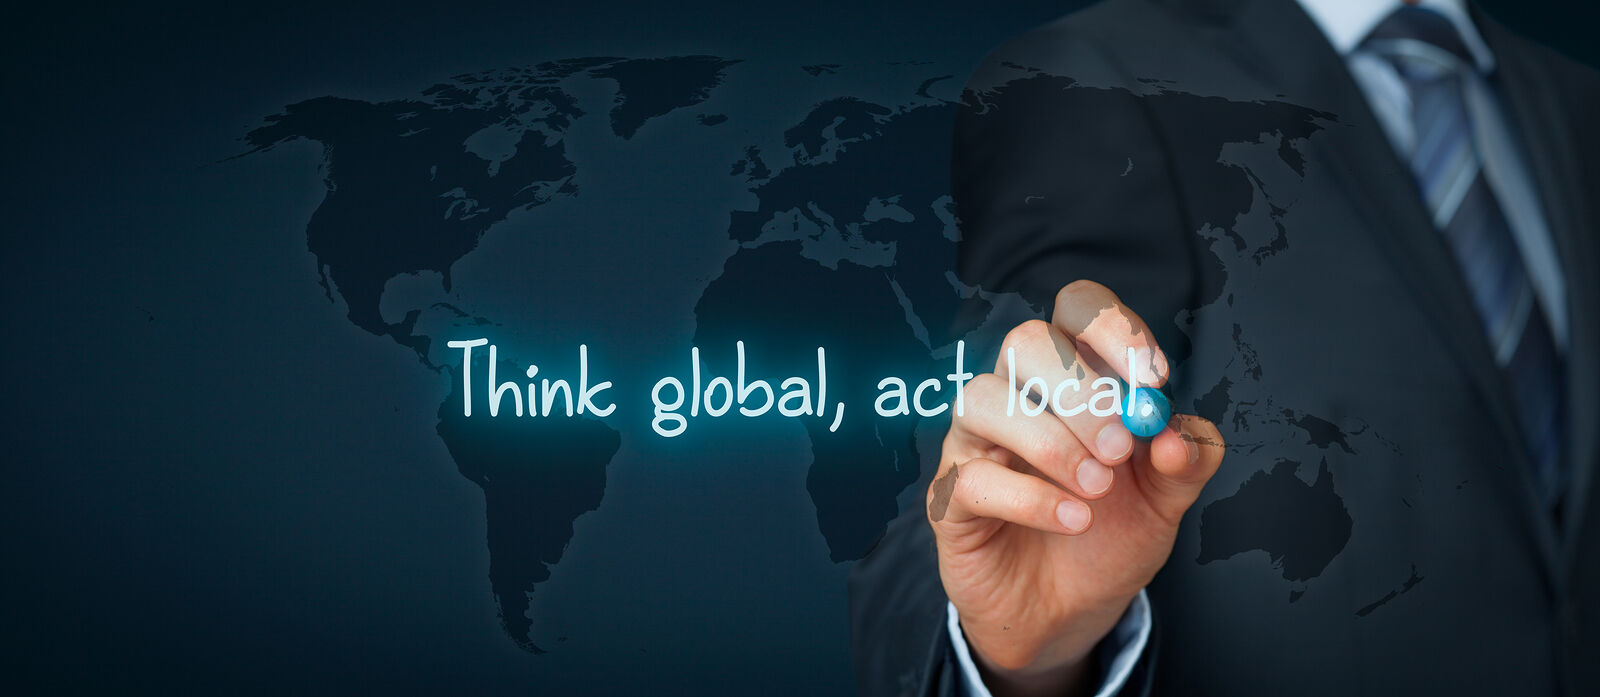 Think Global, act local!